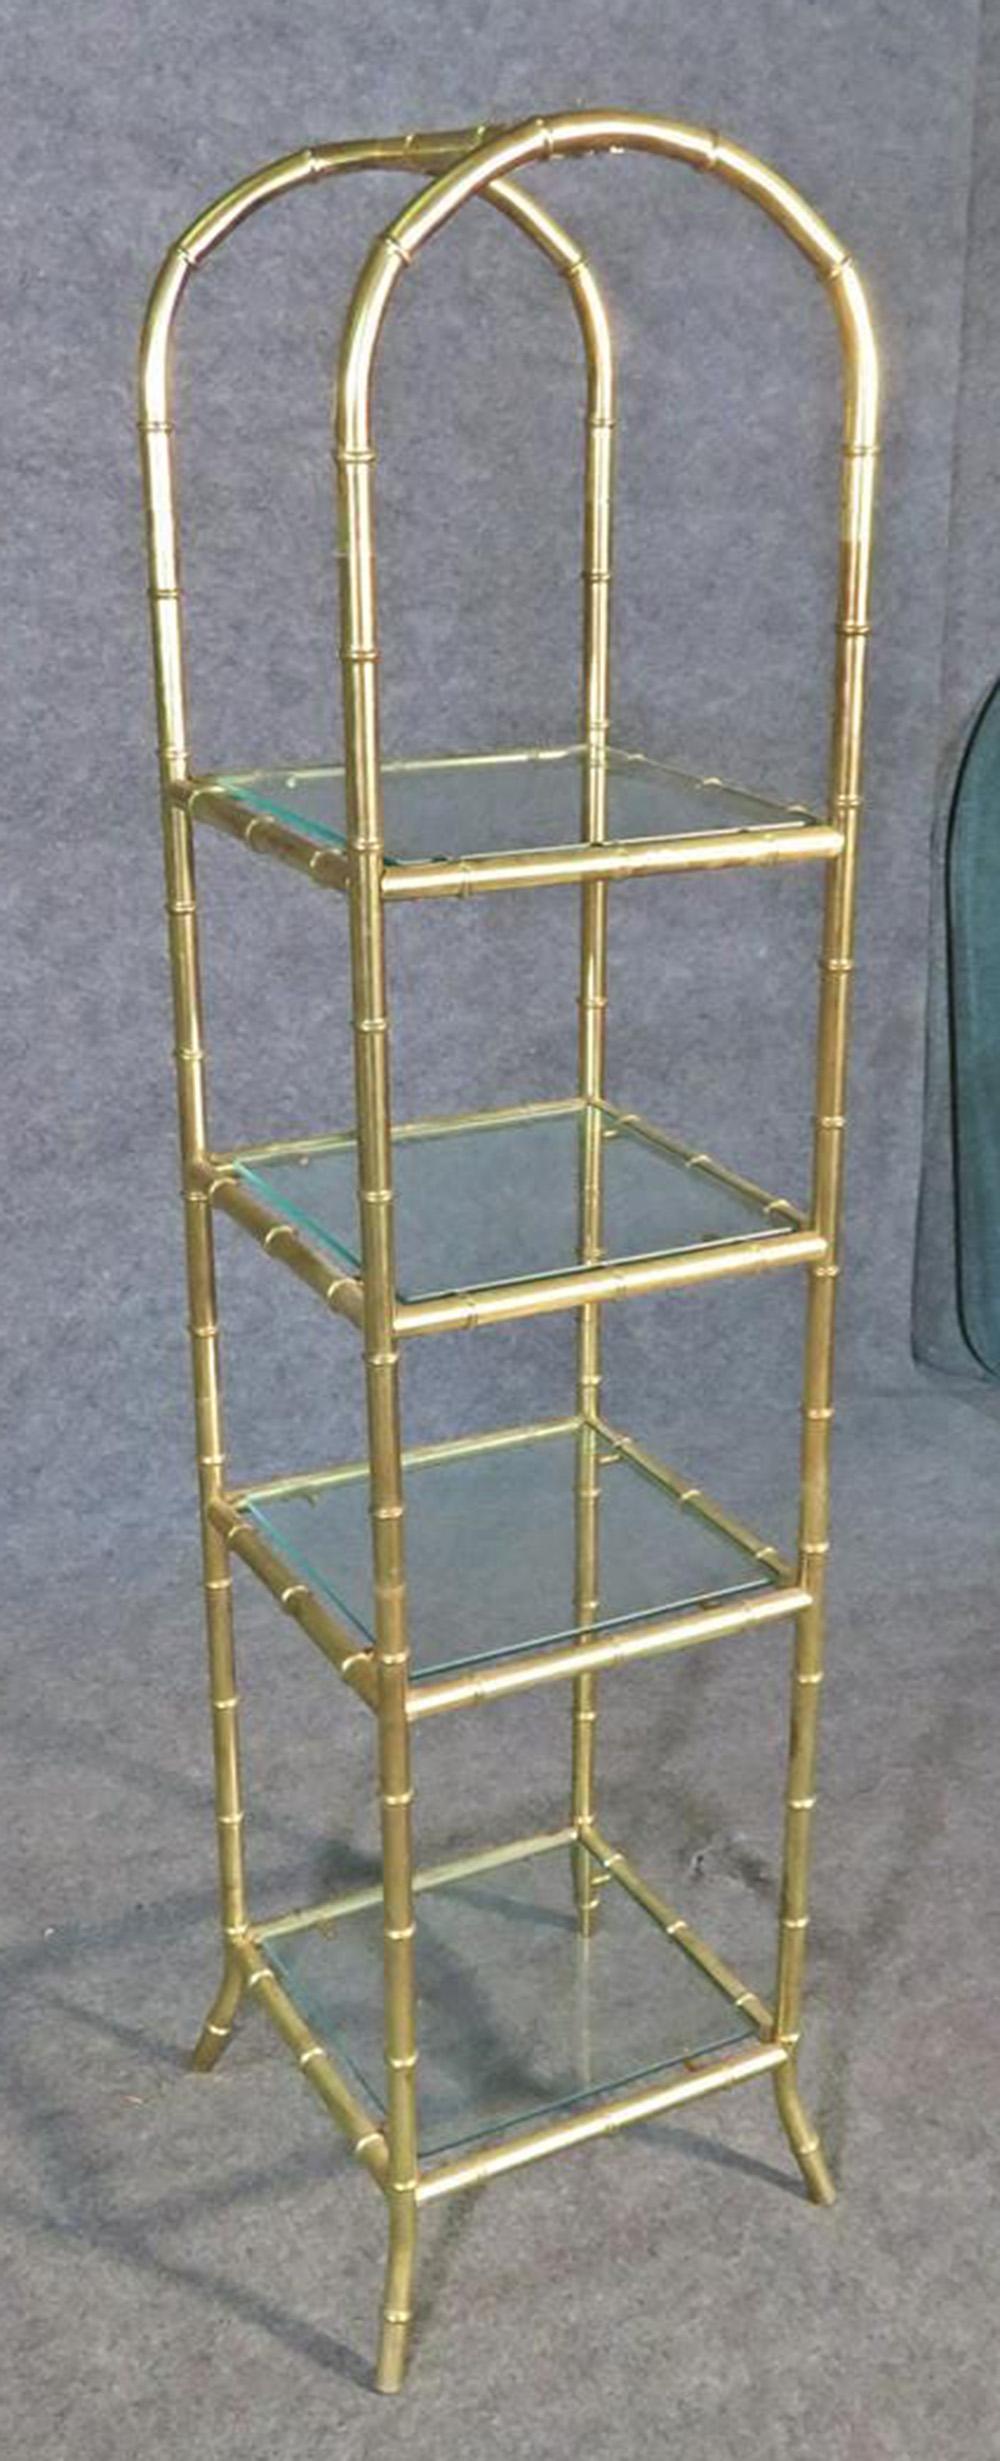 Mid-Century Modern French Arched Bagues Style Petite Faux Bamboo Brass Etagere Shelf, Circa 1950s